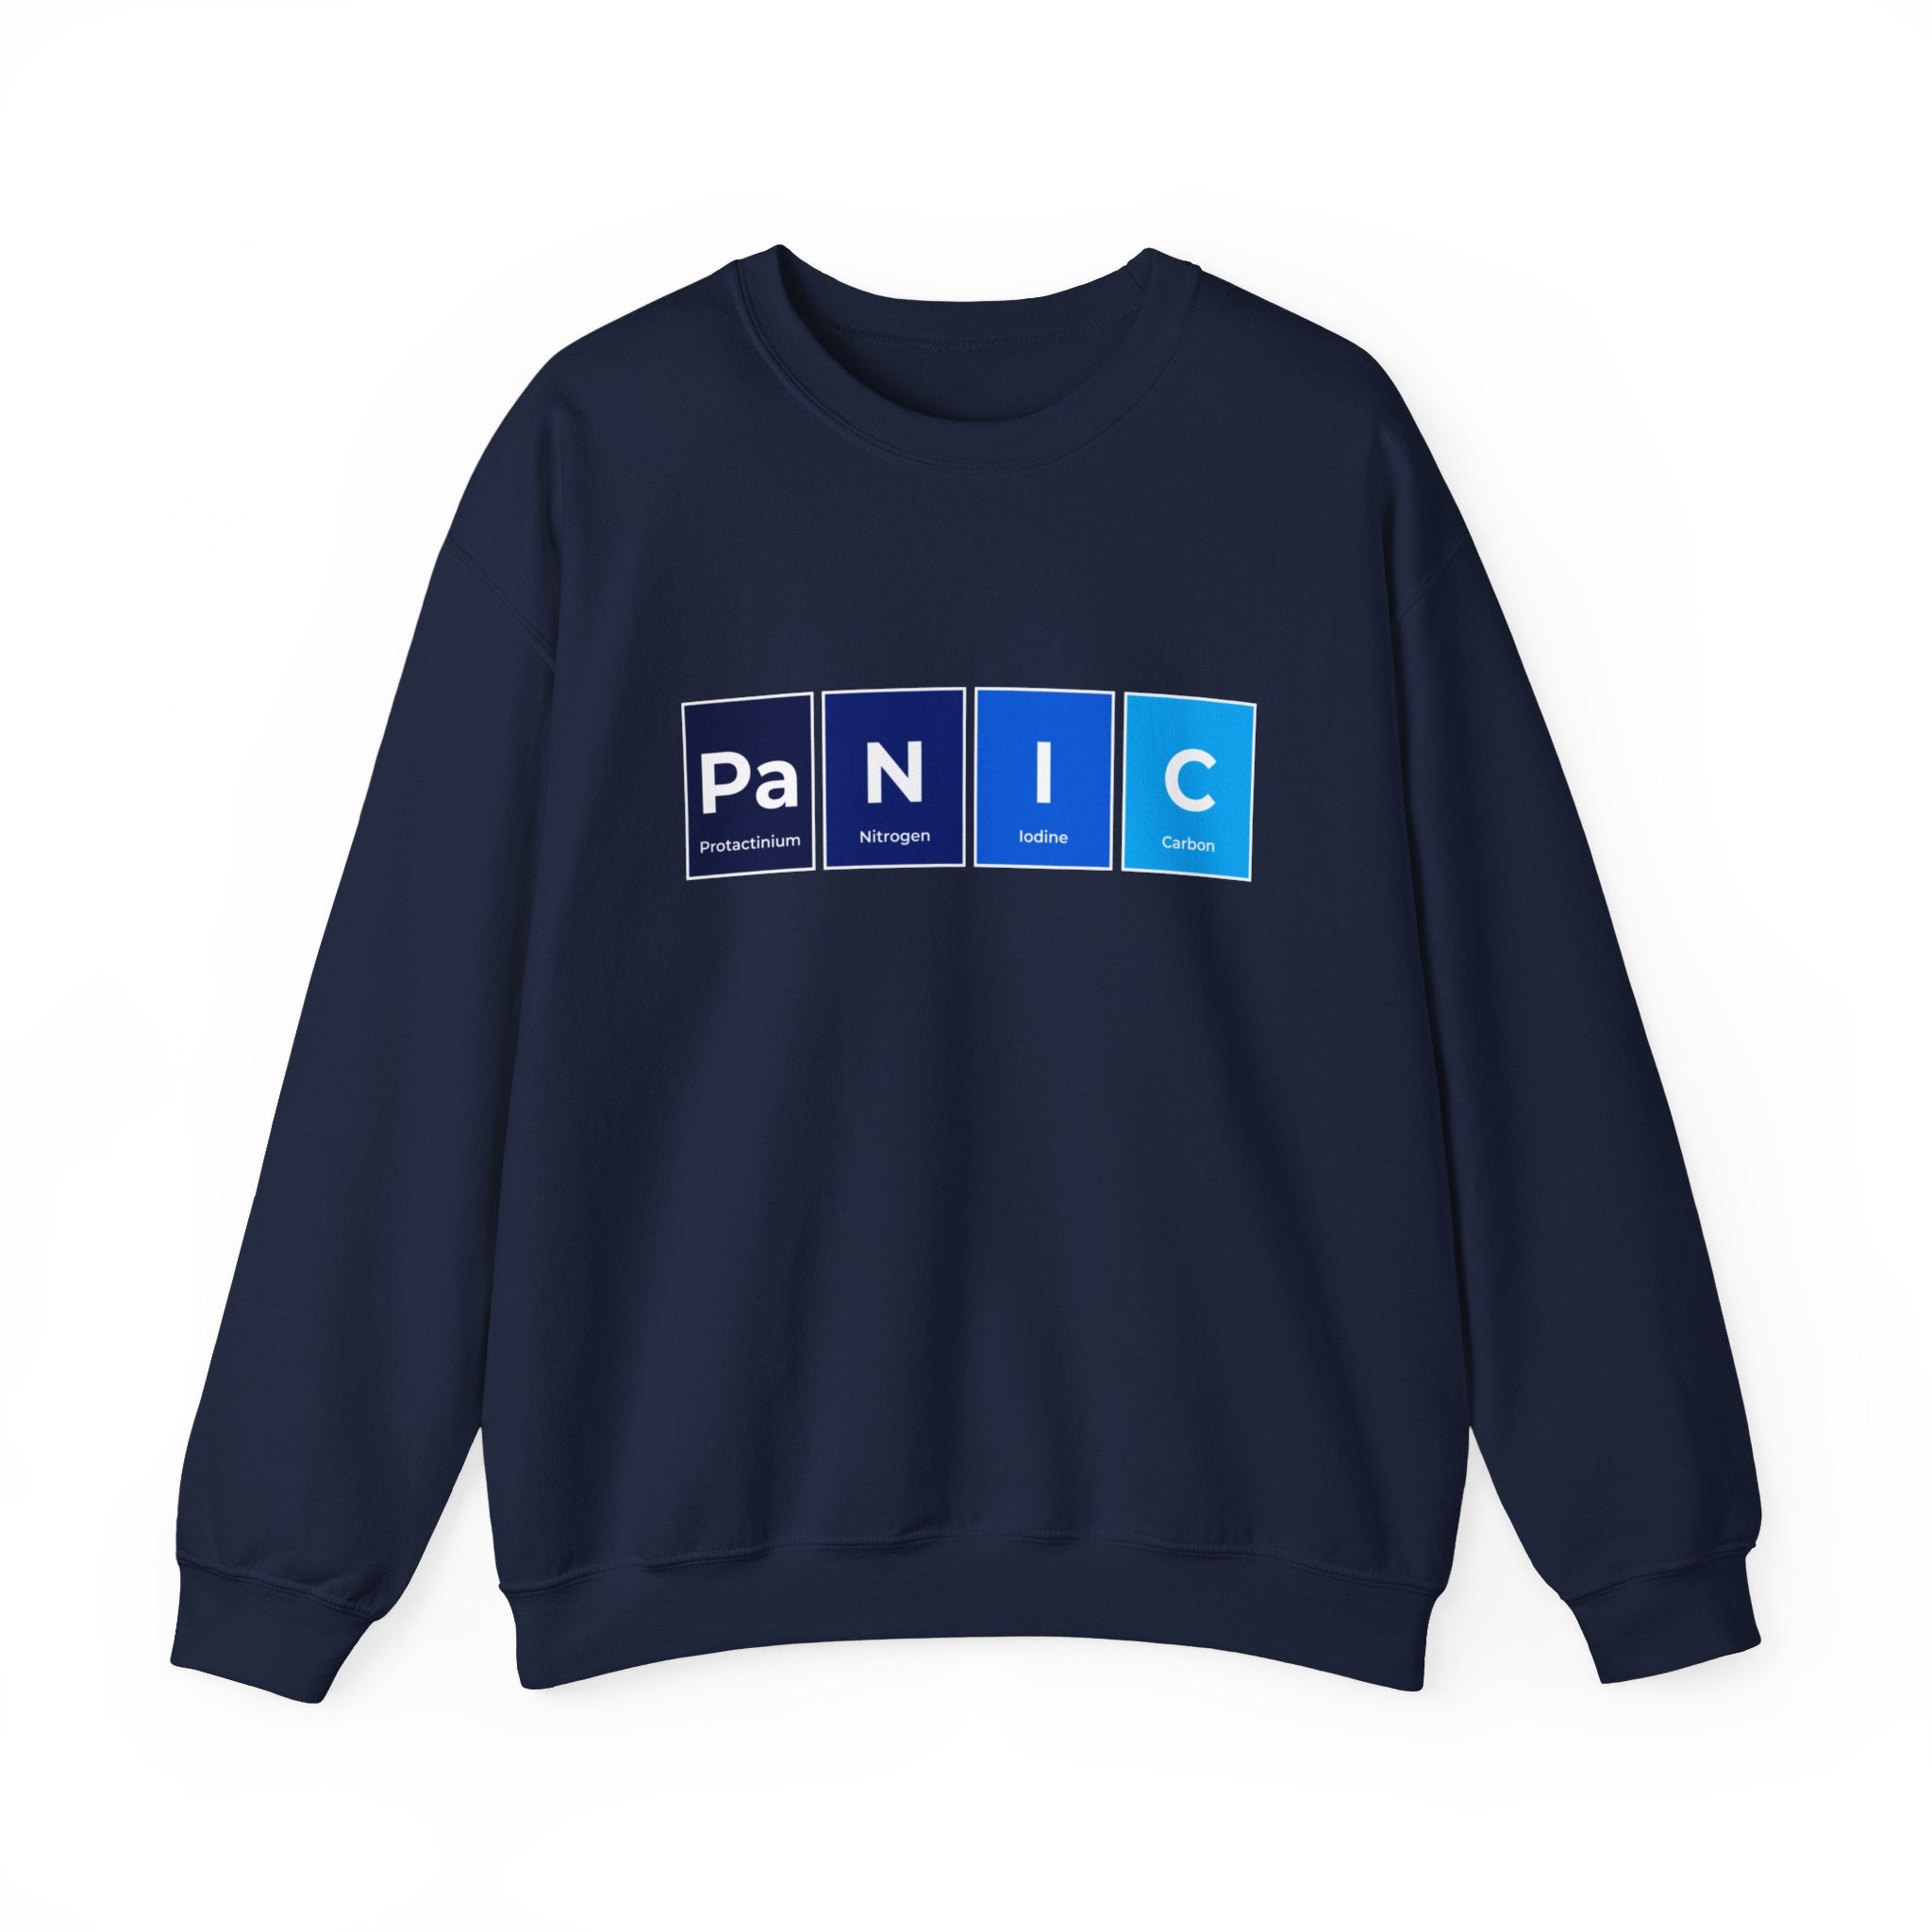 Navy blue Pa-N-I-C - Sweatshirt with a cozy design, using periodic table elements Plutonium, Nitrogen, Iodine, and Carbon—a perfect choice for the colder months.